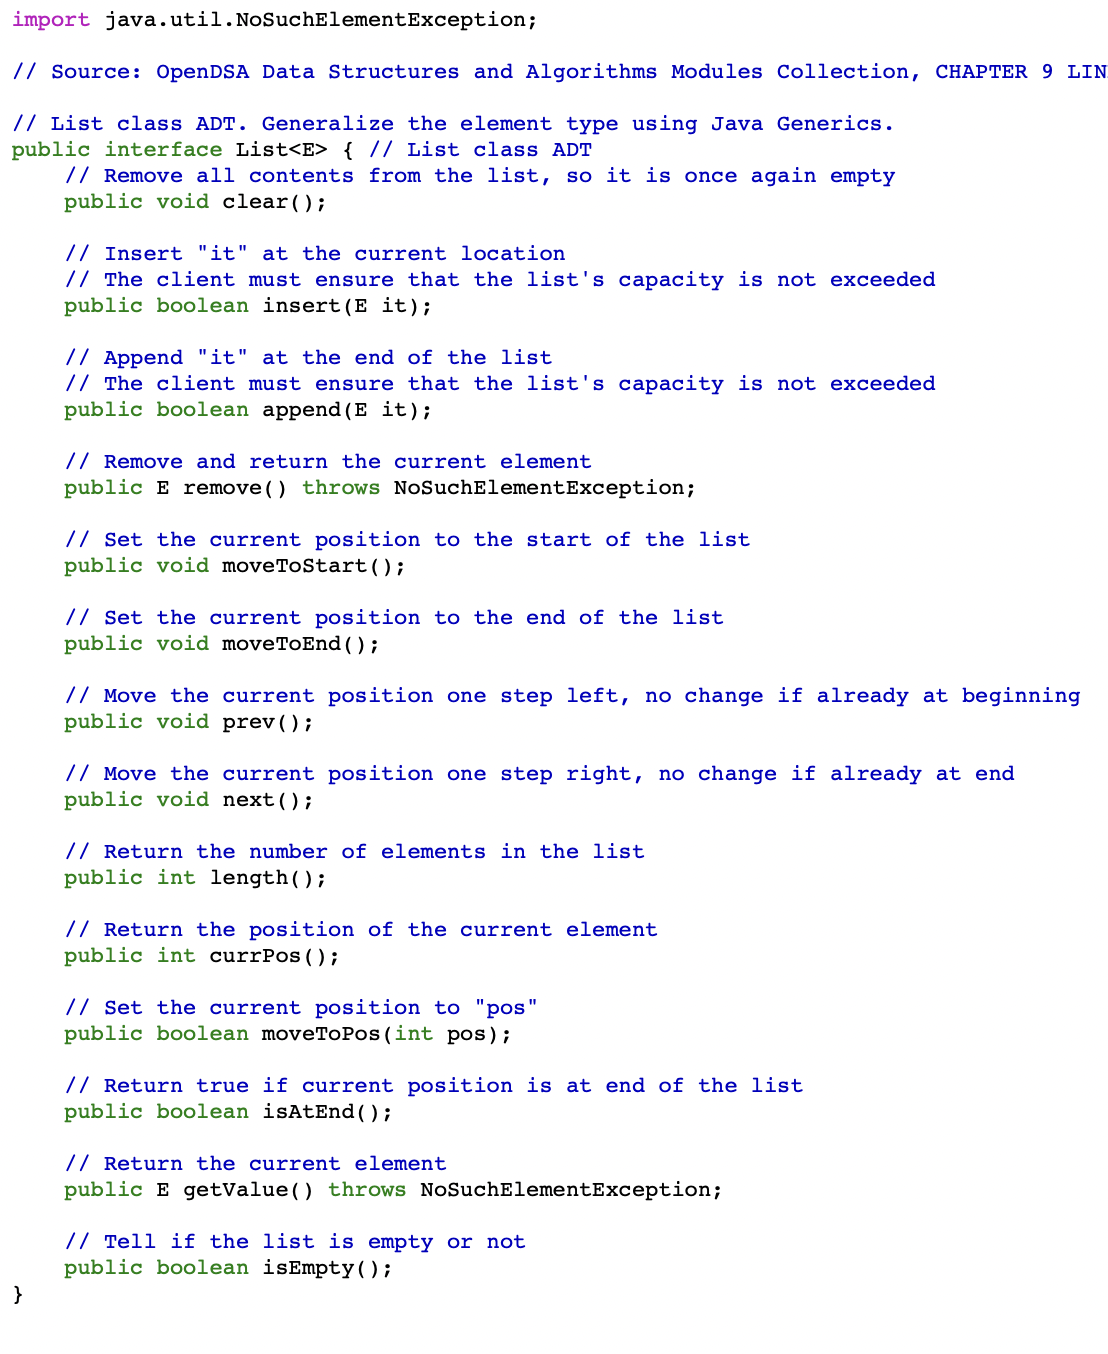 import
java.util.NoSuchElementException;
// Source: OpenDSA Data Structures and Algorithms Modules Collection, CHAPTER 9 LIN
// List class ADT. Generalize the element type using Java Generics.
public interface List<E> { // List class ADT
// Remove all contents from the list, so it is once again empty
public void clear();
}
// Insert "it" at the current location
// The client must ensure that the list's capacity is not exceeded
public boolean insert (E it);
// Append "it" at the end of the list
// The client must ensure that the list's capacity is not exceeded
public boolean append(E it);
// Remove and return the rrent element
public E remove() throws NoSuchElementException;
// Set the current position to the start of the list
public void moveToStart();
// Set the current position to the end of the list
public void moveToEnd();
// Move the current position one step left, no change if already at beginning
public void prev();
// Move the current position one step right, no change if already at end
public void next();
// Return the number of elements in the list
public int length();
// Return the position of the current element
public int currpos();
// Set the current position to "pos"
public boolean moveToPos (int pos);
// Return true if current position is at end of the list
public boolean isAtEnd();
// Return the current element
public E getValue () throws NoSuchElementException;
// Tell if the list is empty or not
public boolean isEmpty();